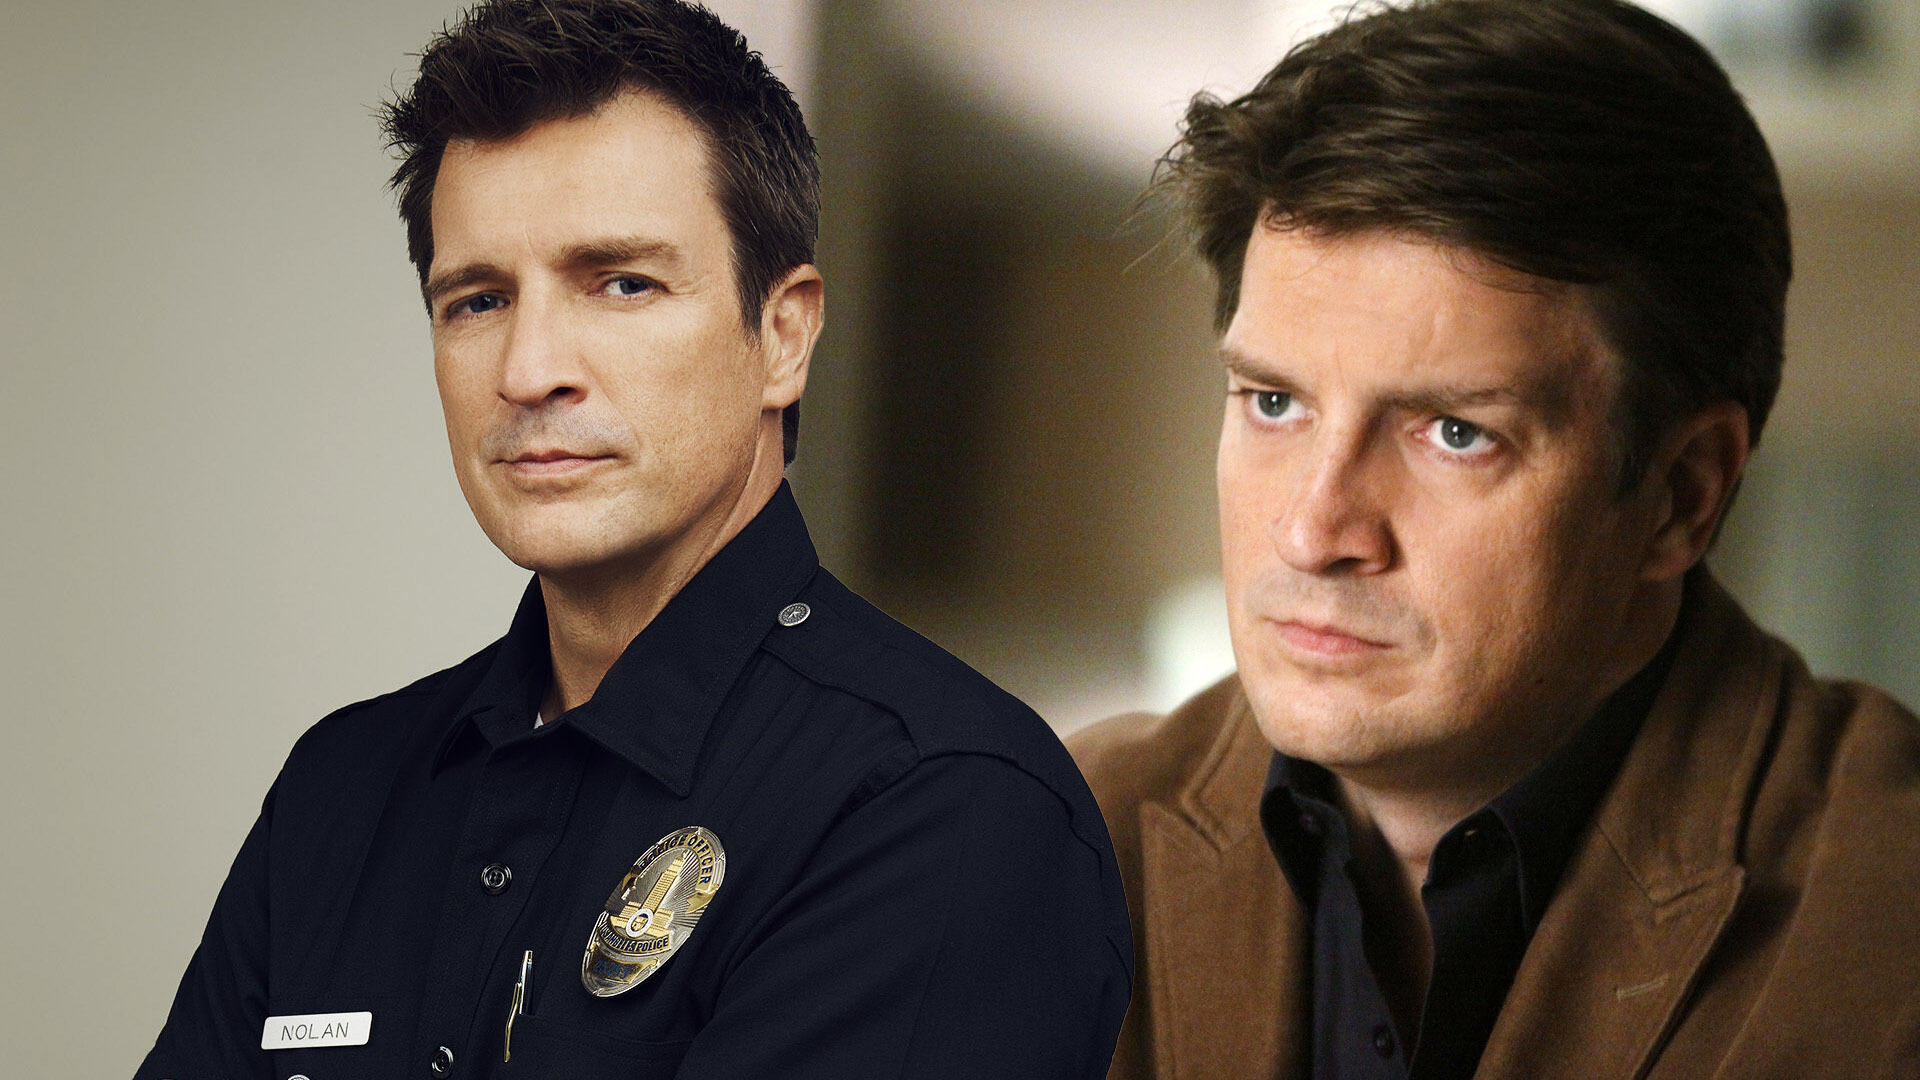 Biggest Castle Actors Guest Starred in The Rookie, but Don't Expect Stana Katic There